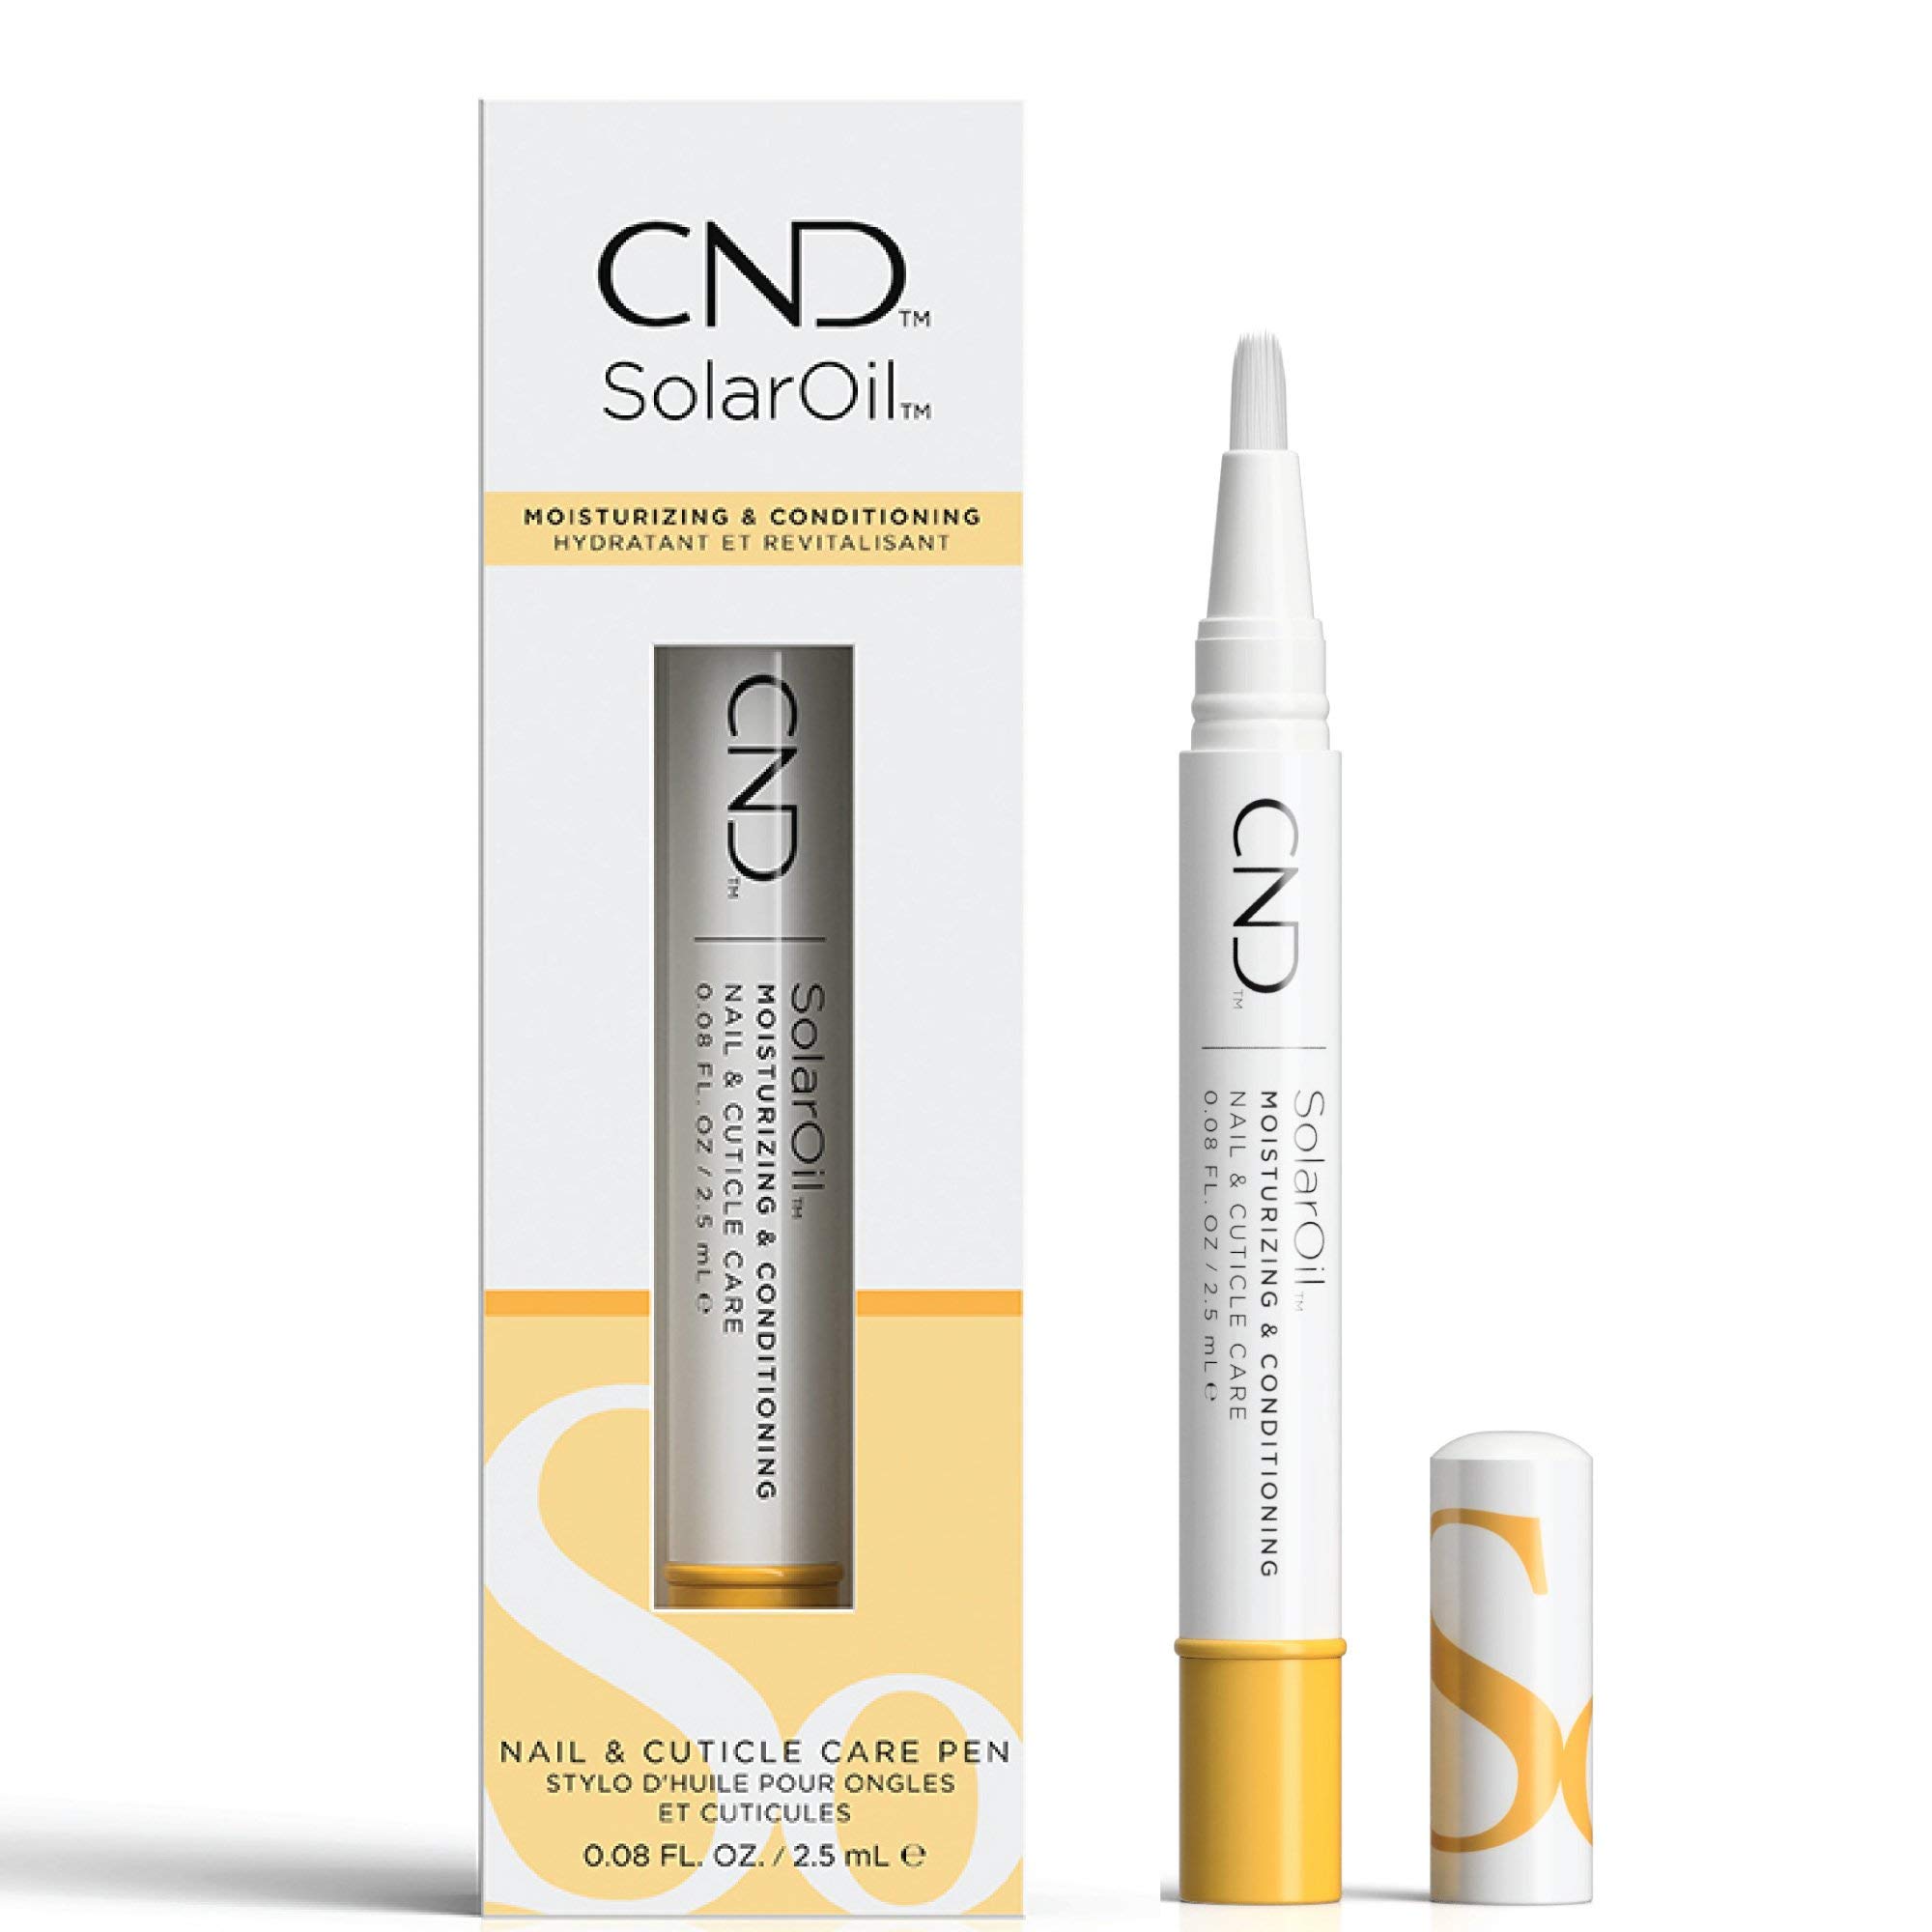 CND Solar Oil & RescueRxx Nail and Cuticle Care, Cuticle Oil Pen, Keratin Treatment Pen, On-the-Go, Travel-Sized Beauty